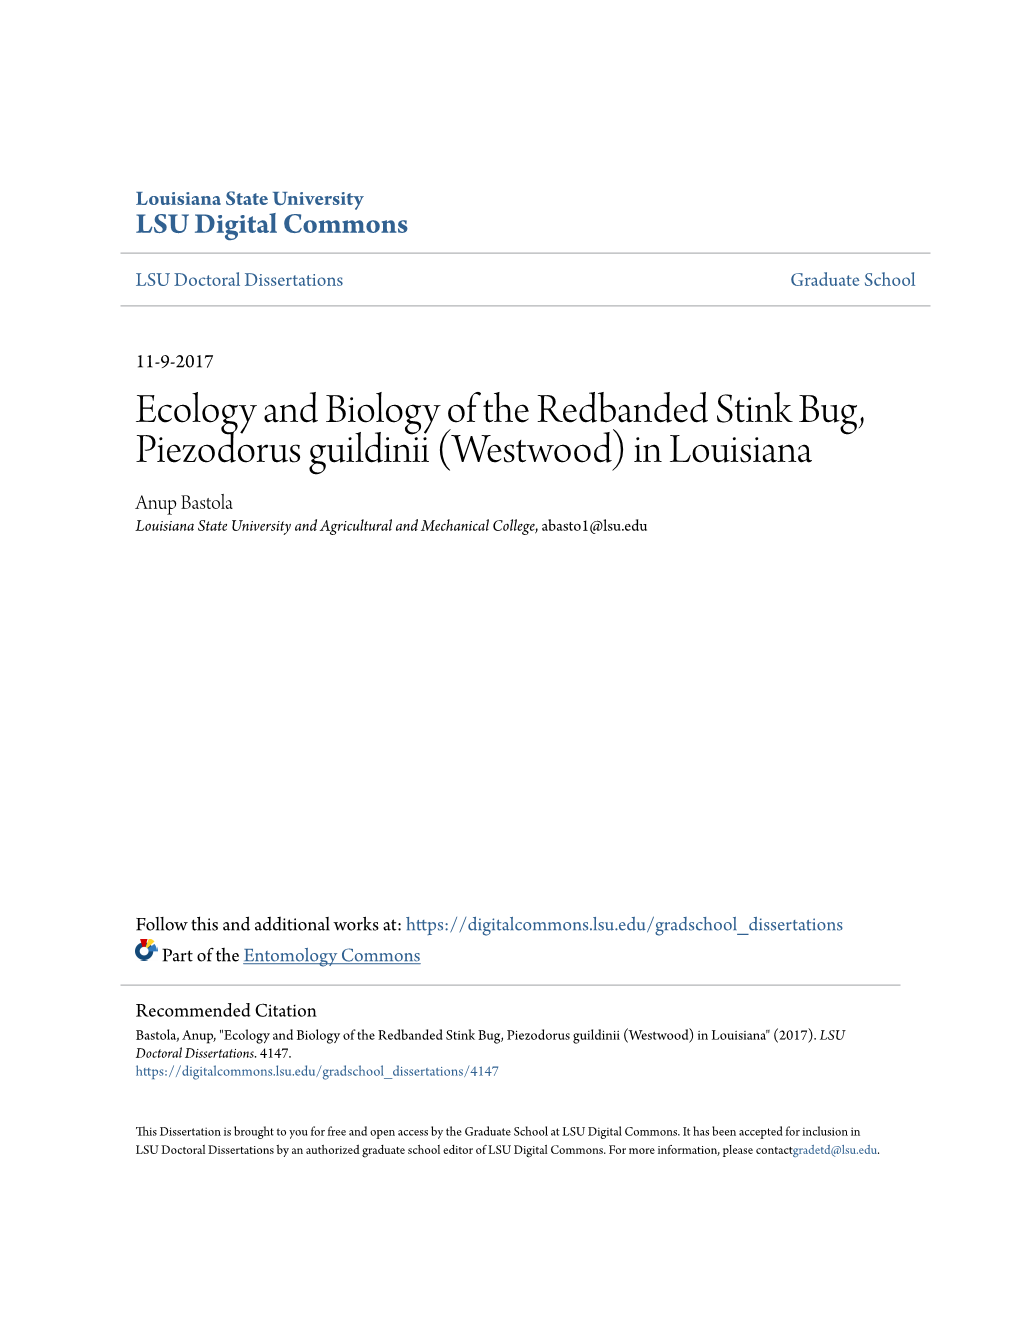 Ecology and Biology of the Redbanded Stink Bug, Piezodorus